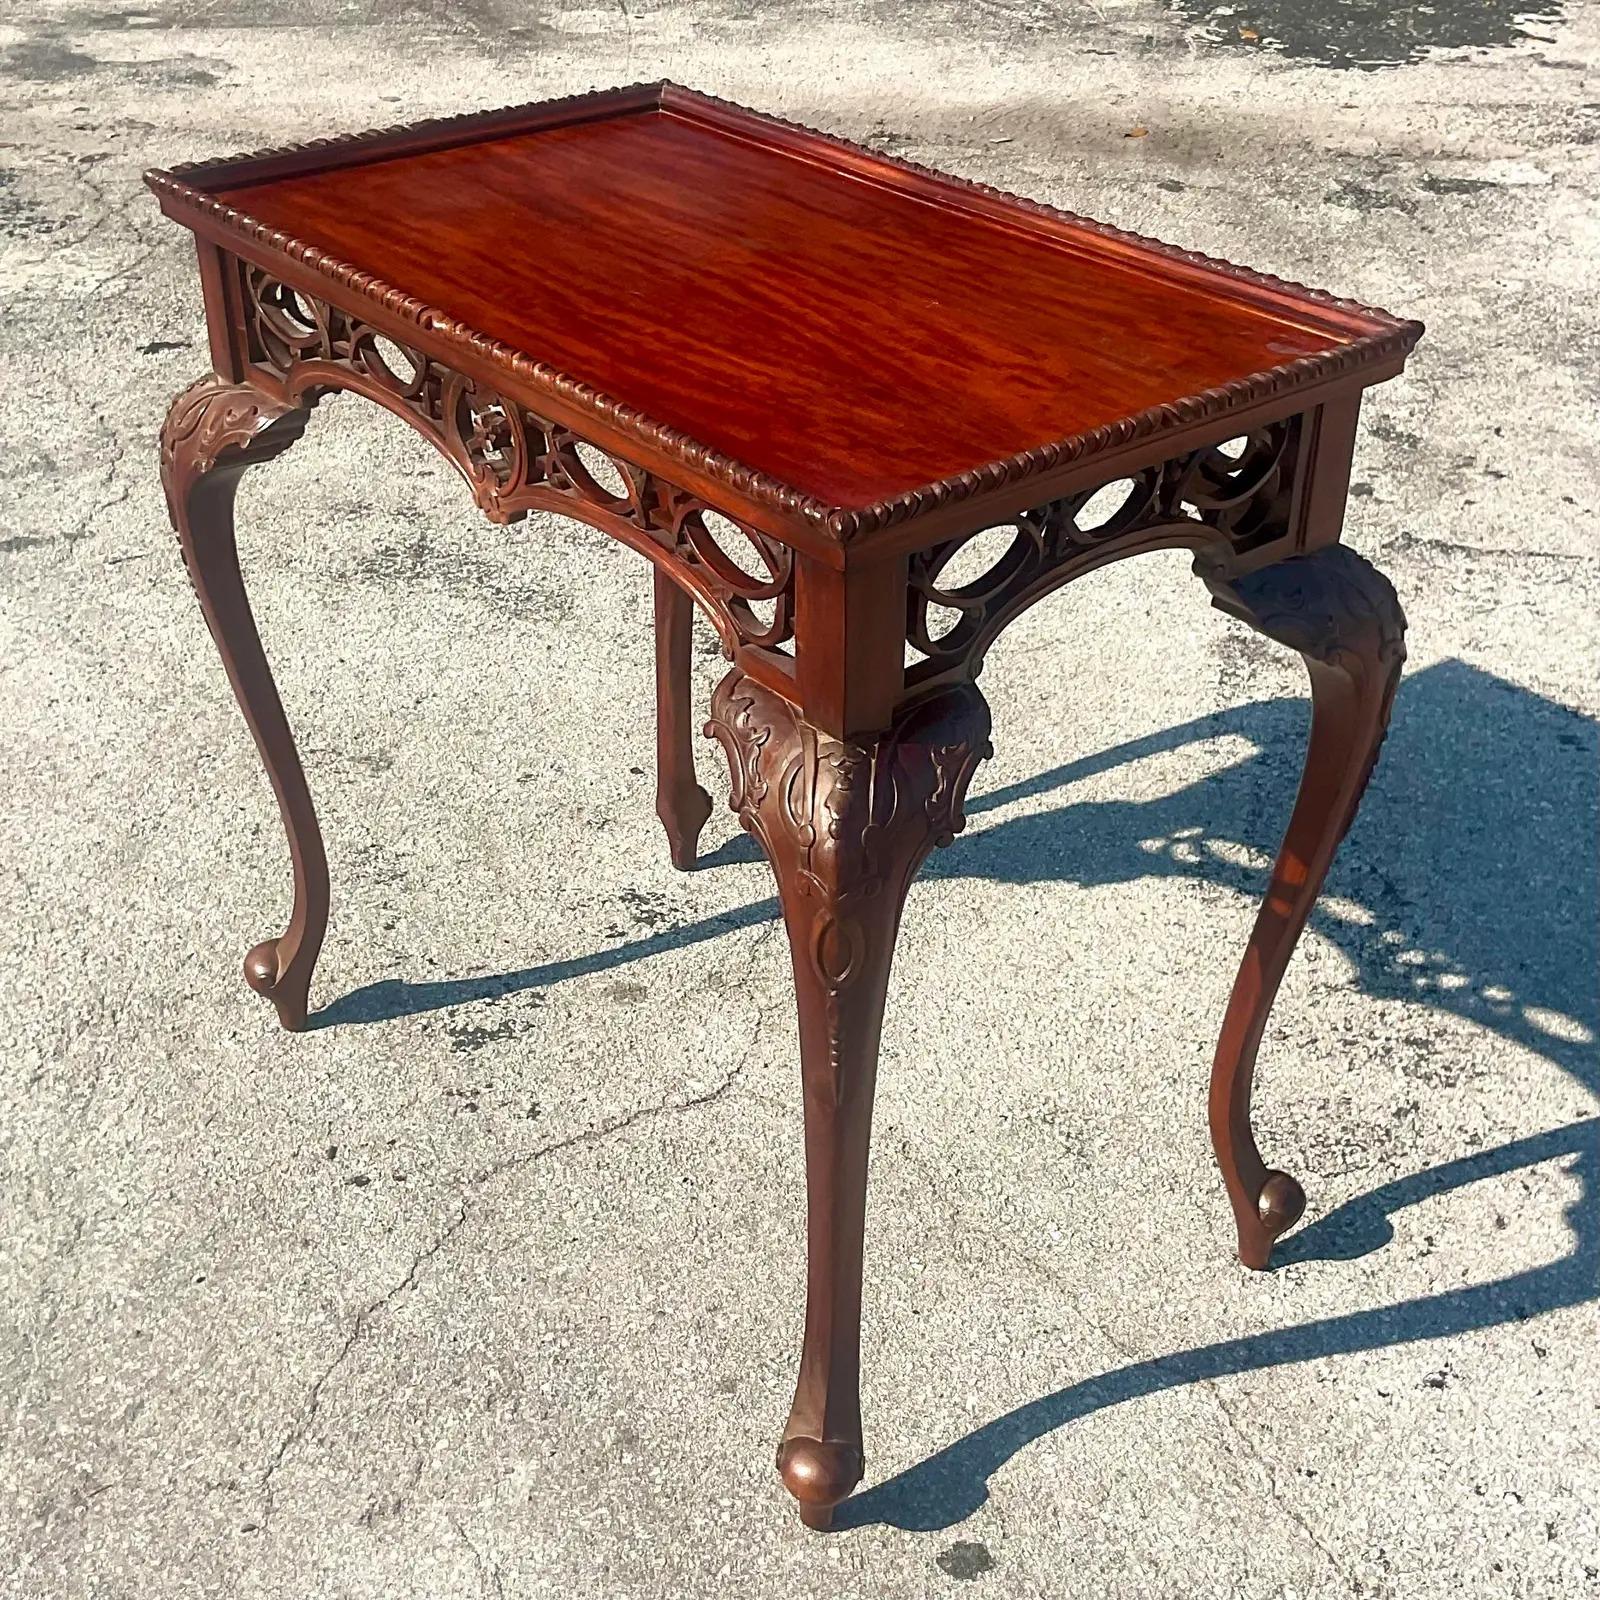 A fantastic vintage Regency Tea table. Beautiful hand carved Cabriolet legs with open fretwork detail abound the apron. Acquired from a Palm Beach estate.